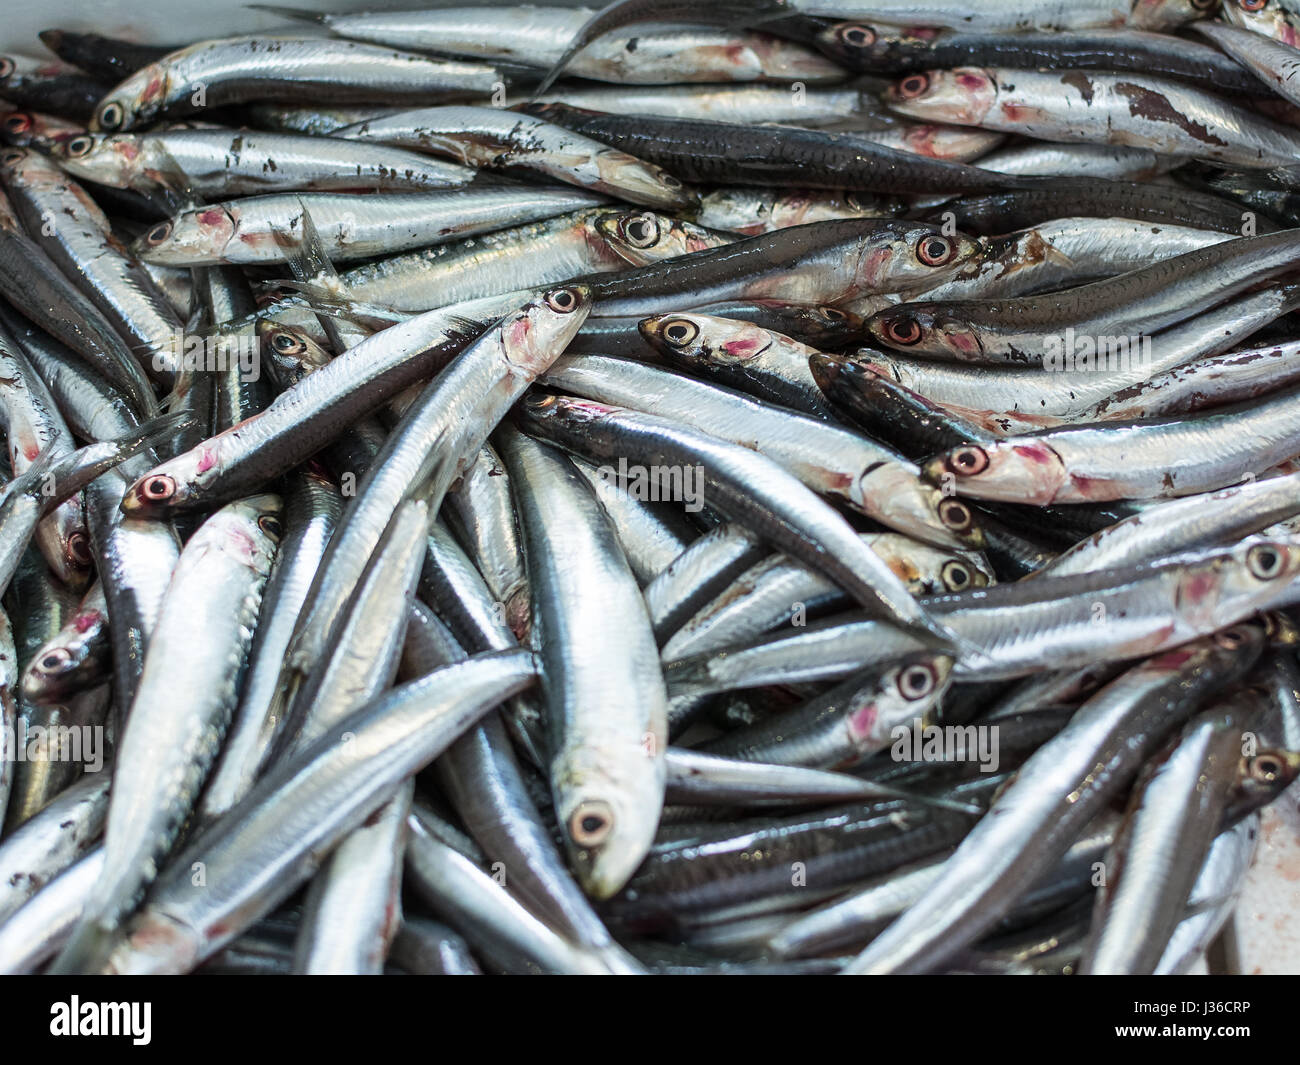 European anchovy in a seafood market Stock Photo